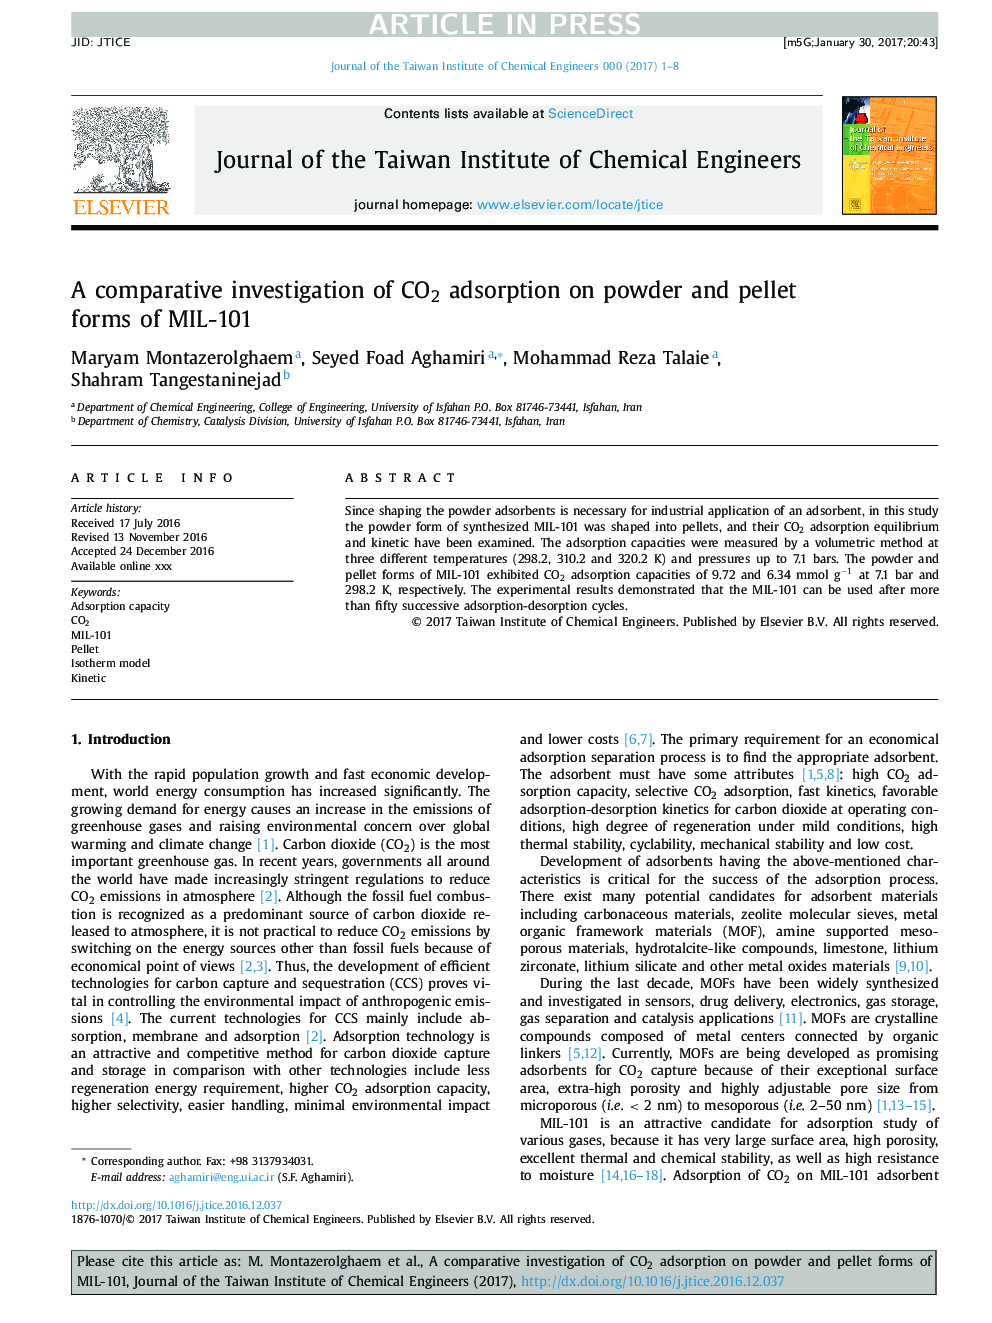 A comparative investigation of CO2 adsorption on powder and pellet forms of MIL-101